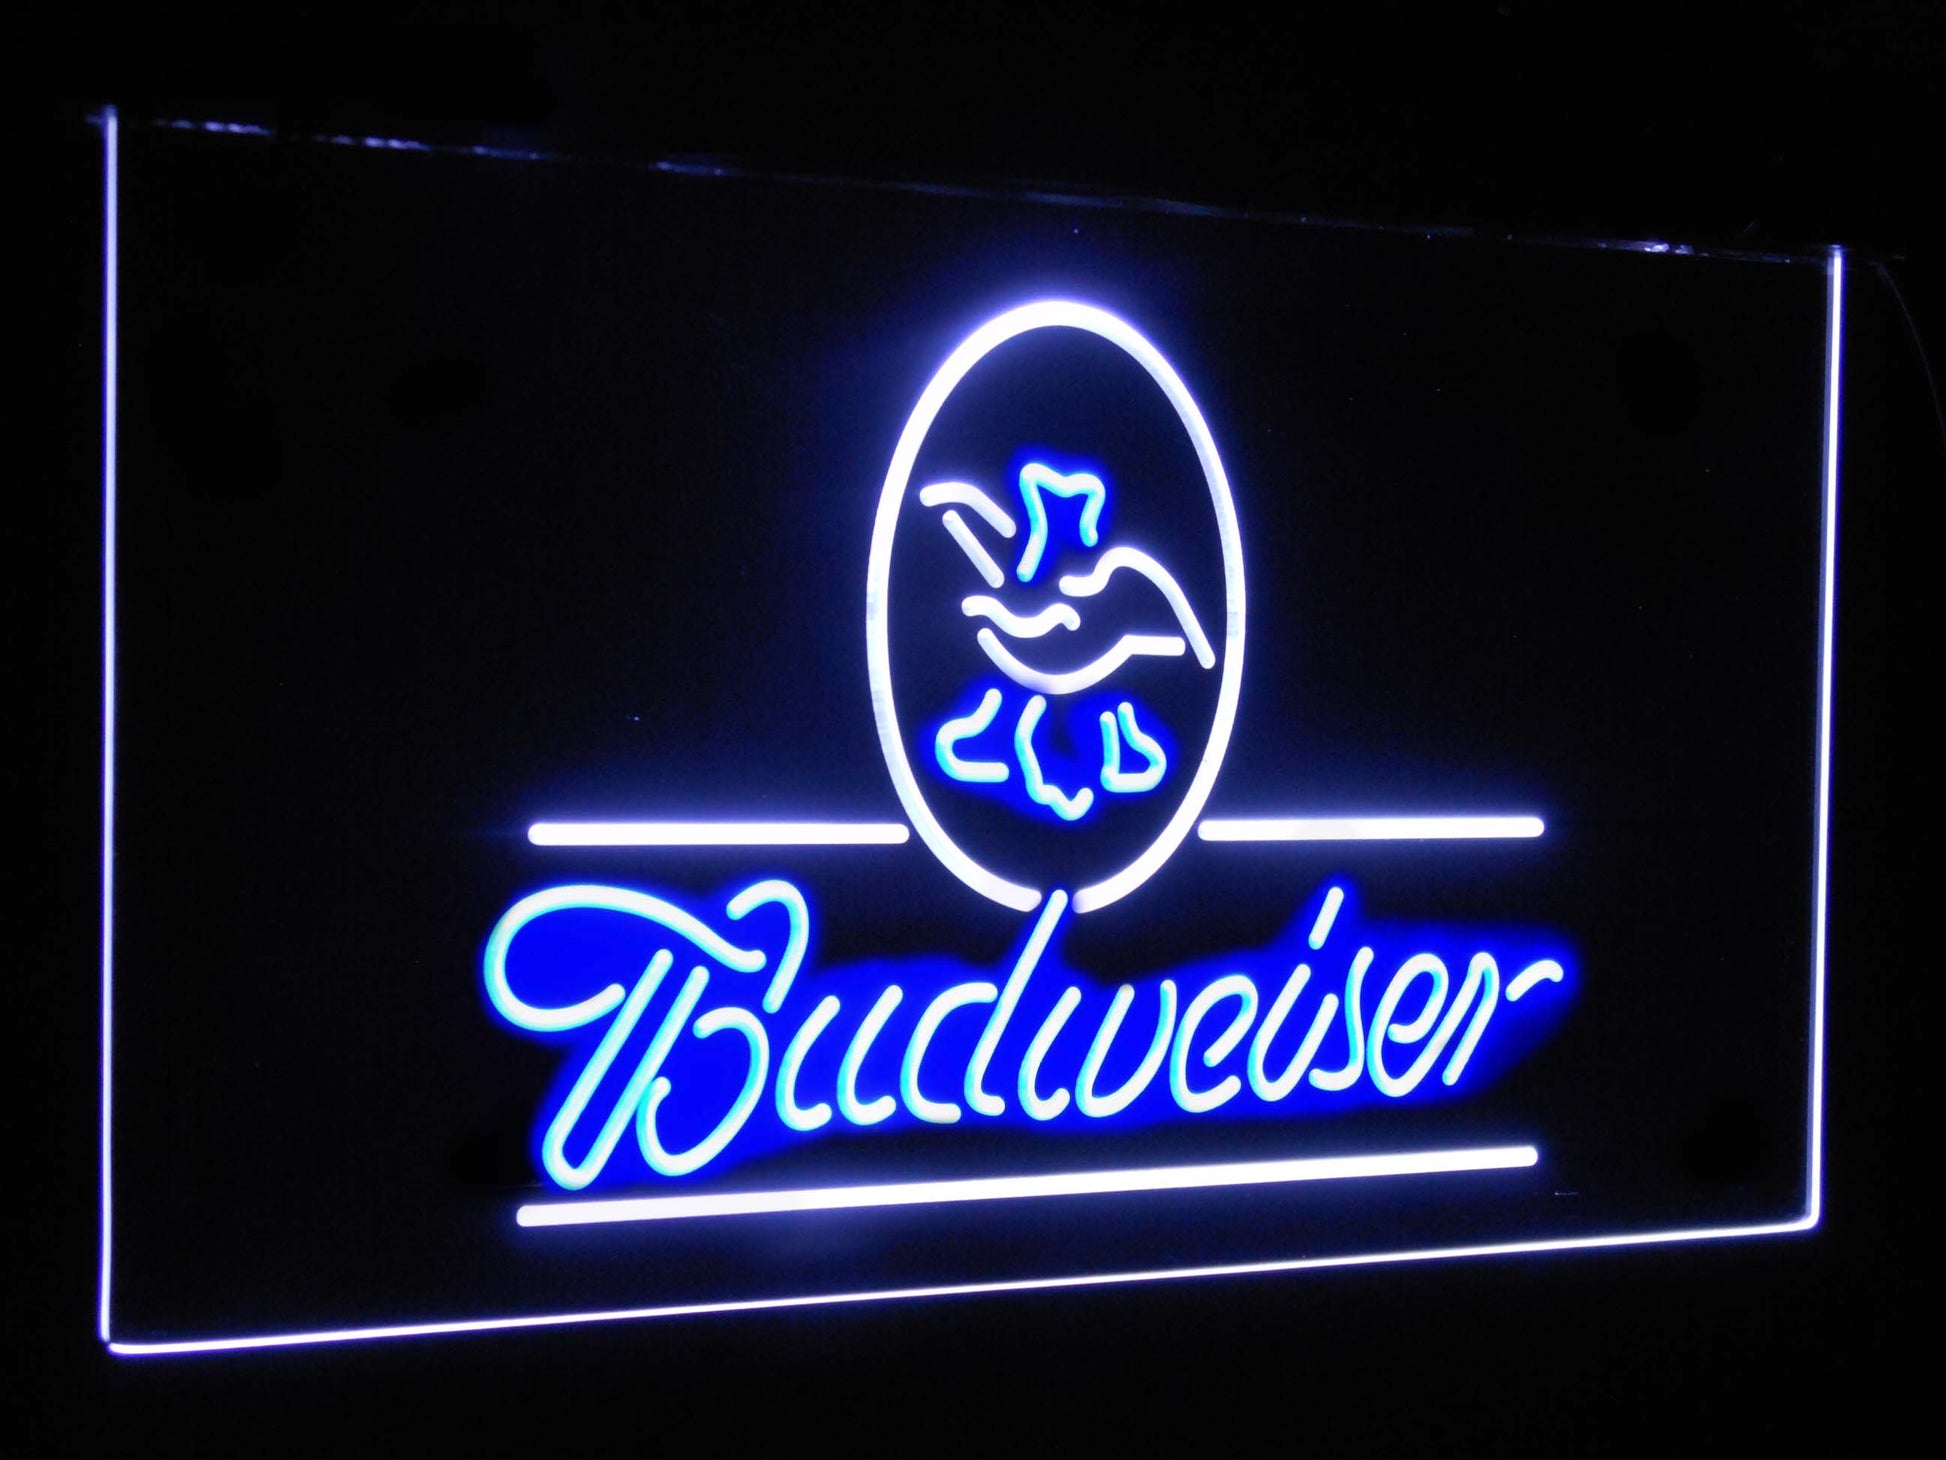 Budweiser Eagle US  Company Bar Decor Dual Color Led Neon Light Signs st6-a2008 by Woody Signs Co. - Handmade Crafted Unique Wooden Creative